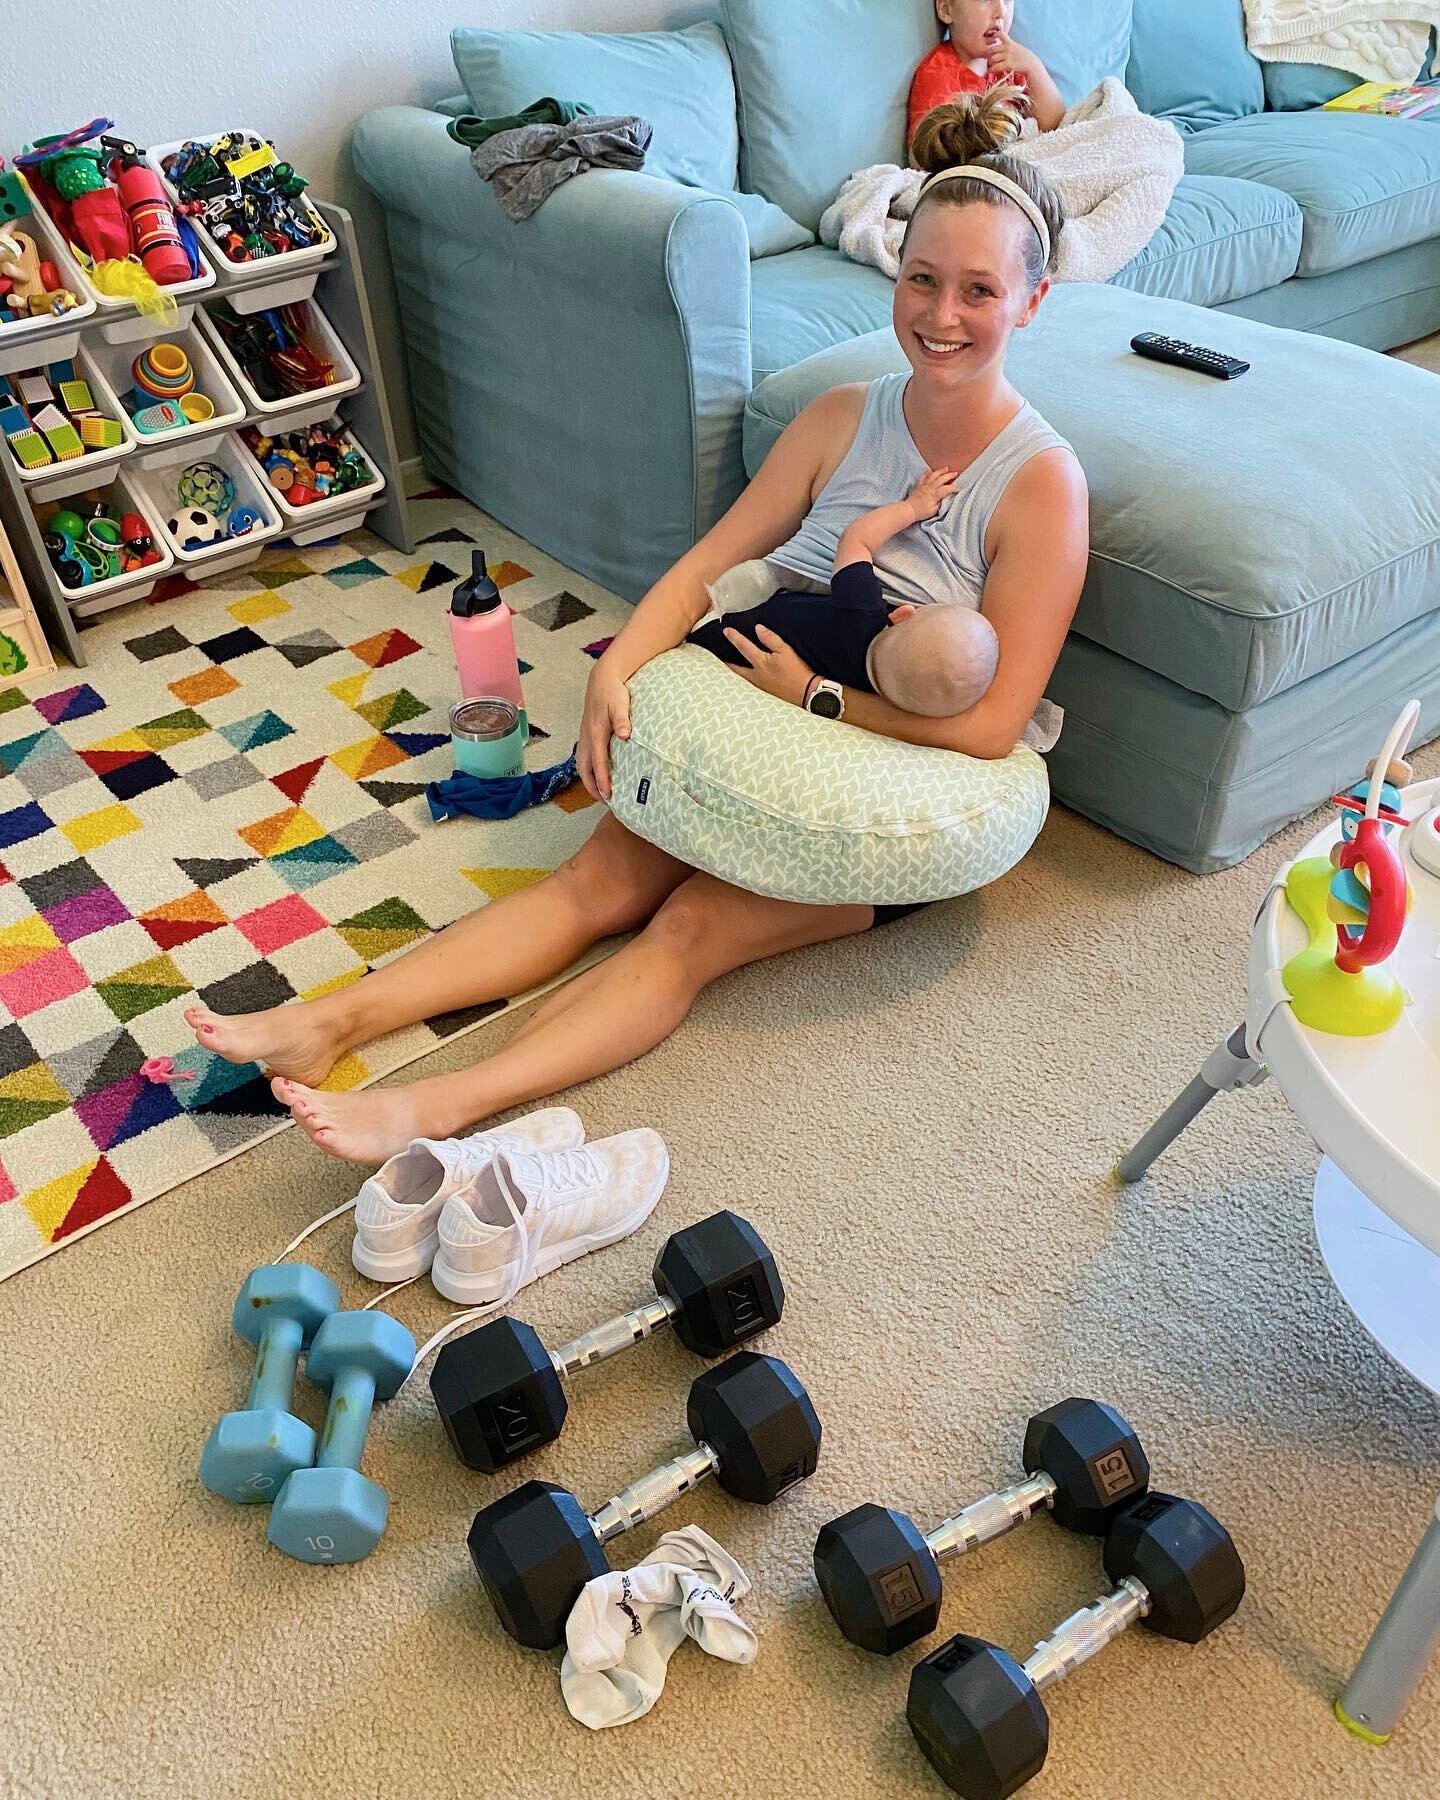 This is working out with two littles 👶🏼👦🏼

🏋🏼&zwj;♀️ Baby woke up early from his nap so I barely finished my @onepeloton 35 min strength workout and 10 minutes of @barre3 postnatal core 

🥵 Sitting on the floor to nurse because I&rsquo;m so sw